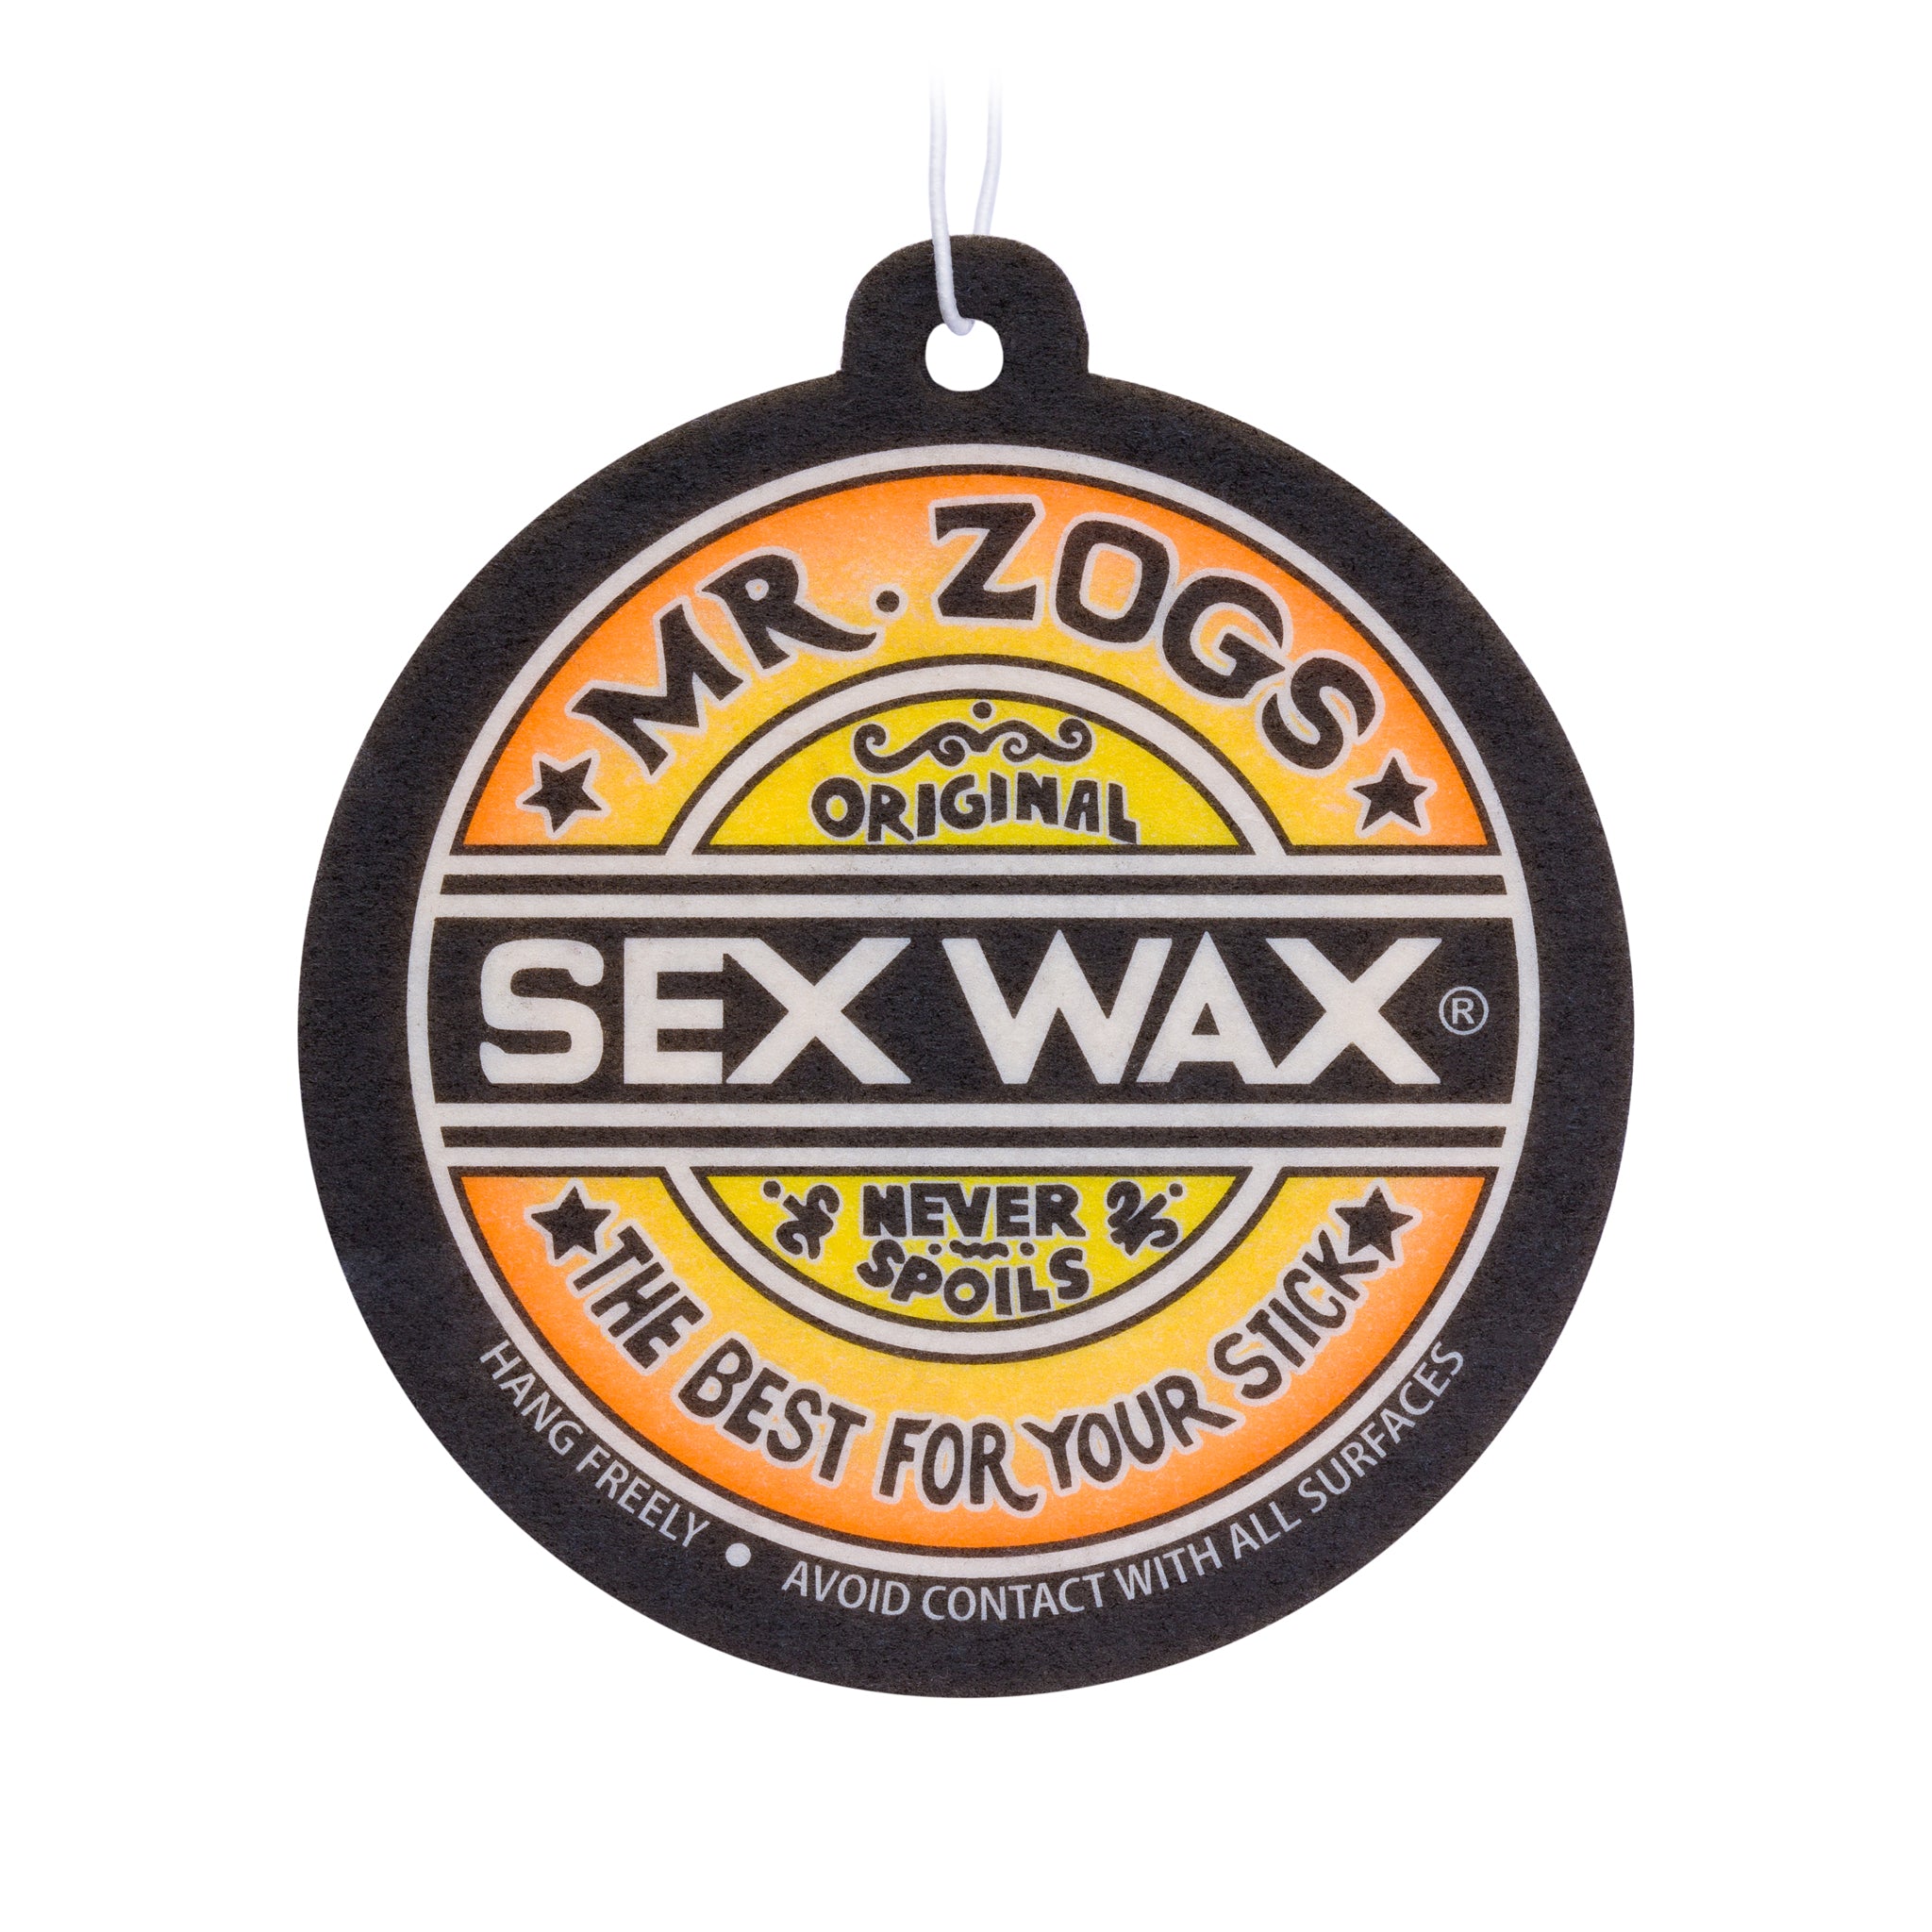 Sex Wax Air Fresheners Bulk Pack x 4 Scents Grape Coconut Strawberry and Pineapple